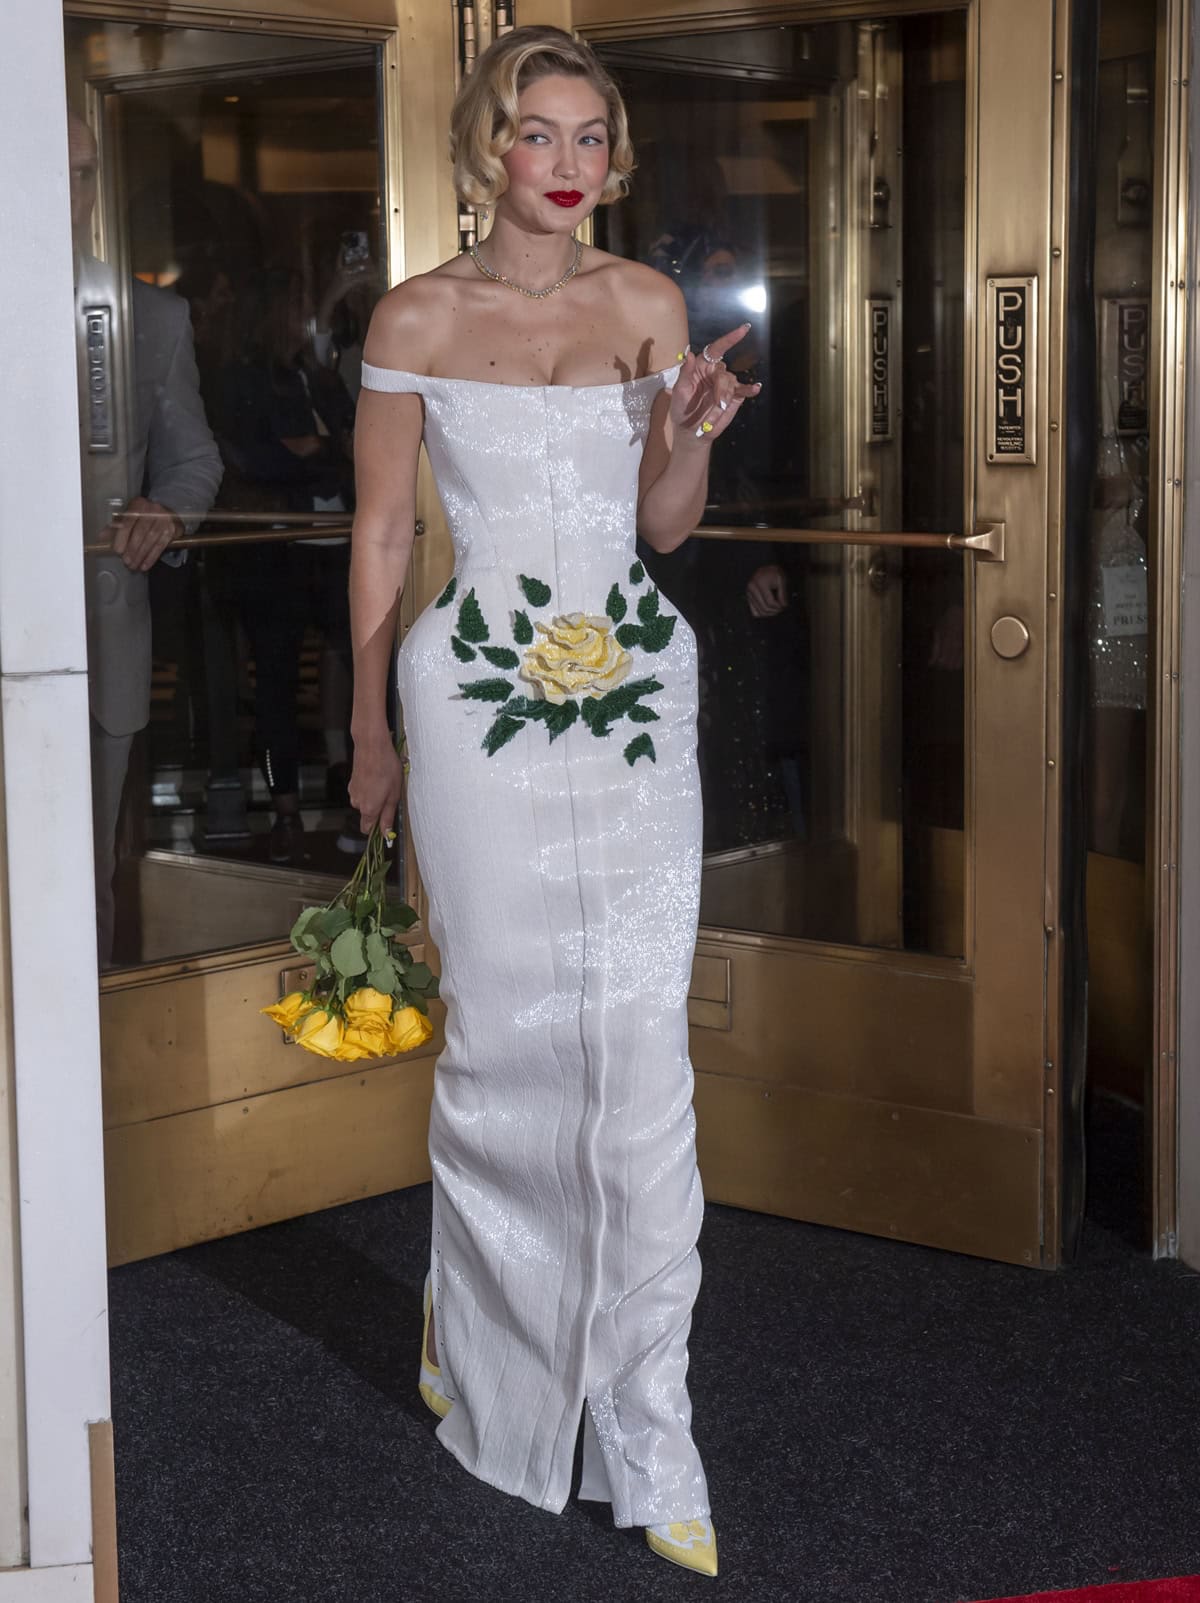 Subtle yet stunning: Gigi Hadid's elegant Thom Browne pumps peek out from under her voluminous Met Gala gown, adding a hint of color and sophistication